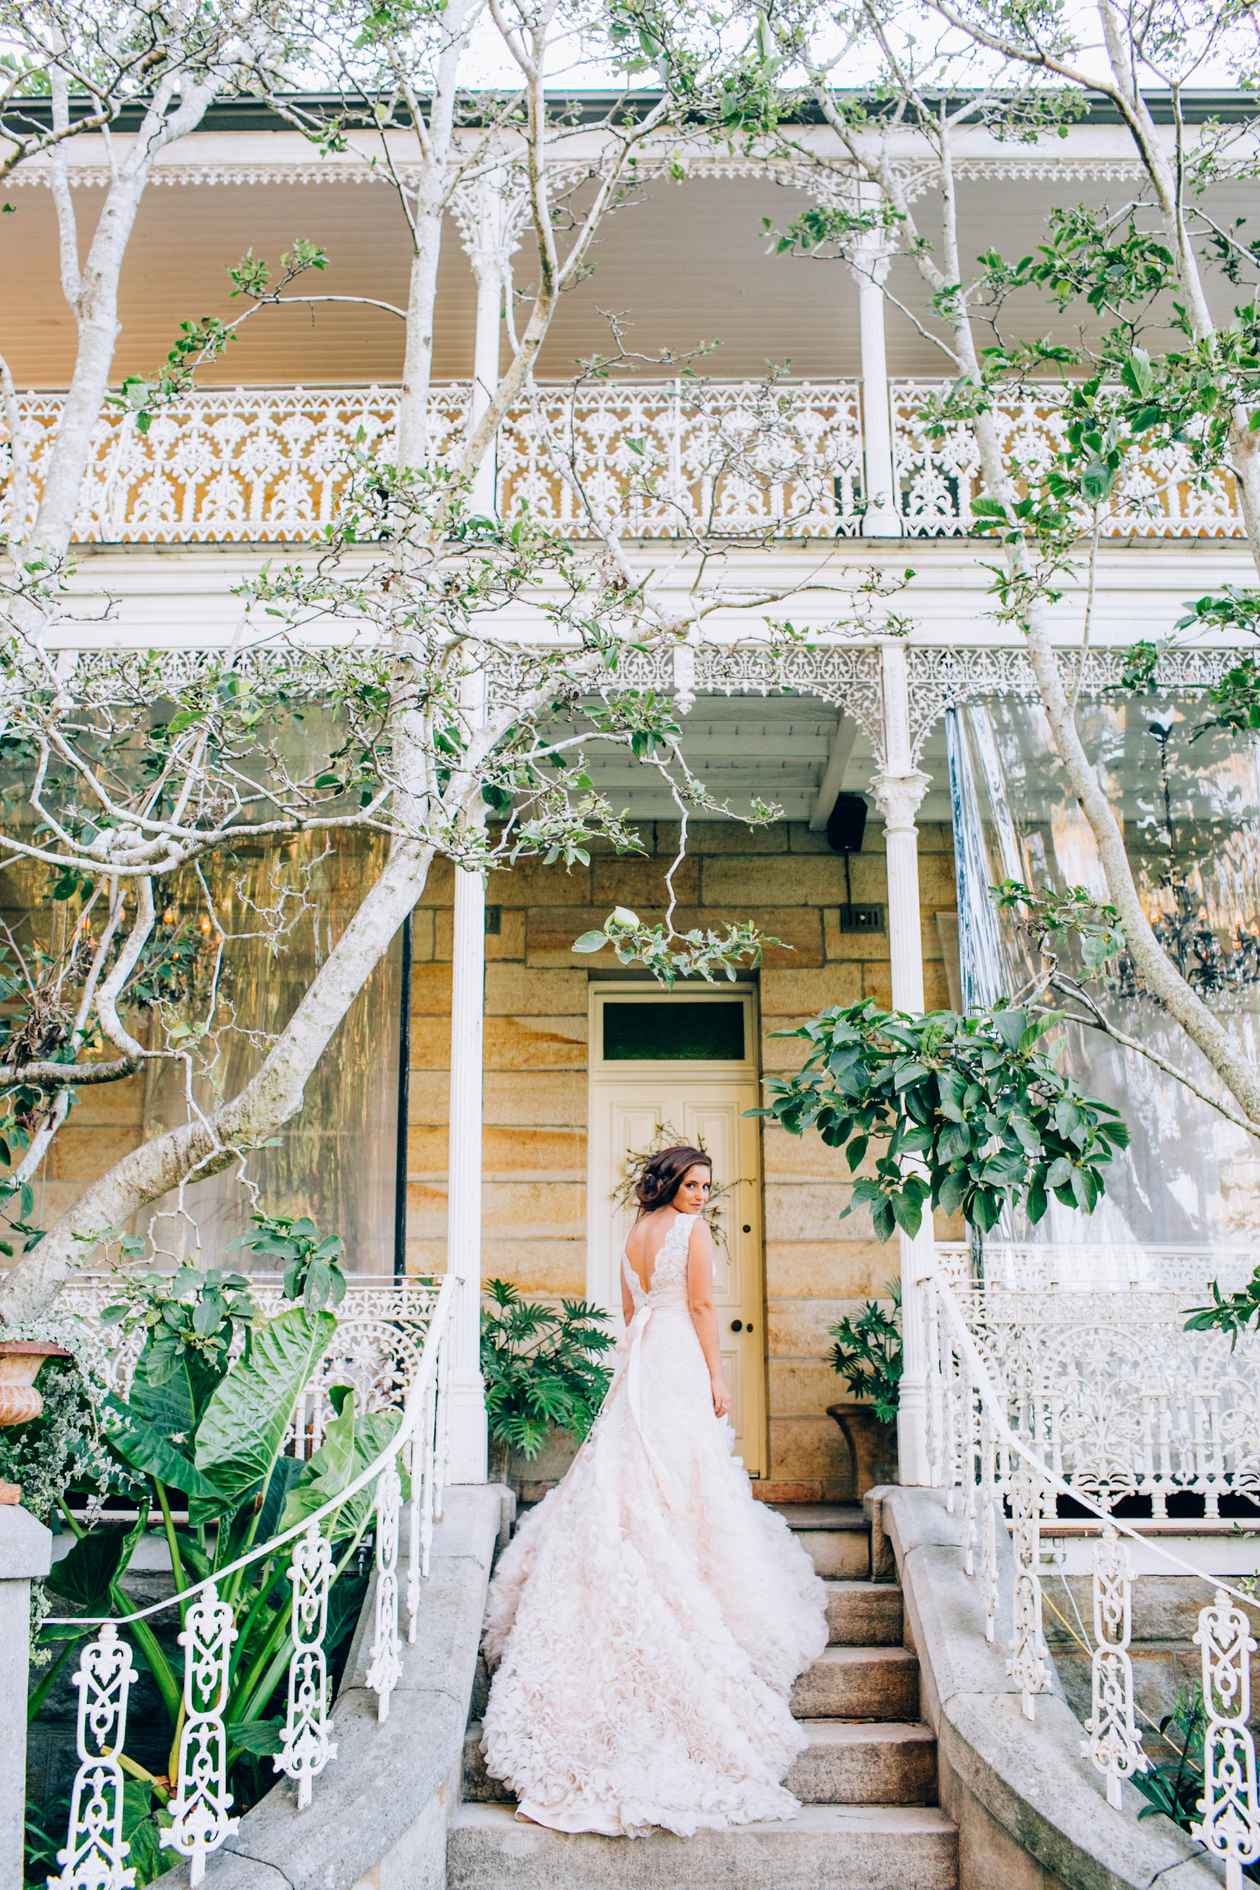 Wedding Gown by Allure Bridals at Terrara House Estate